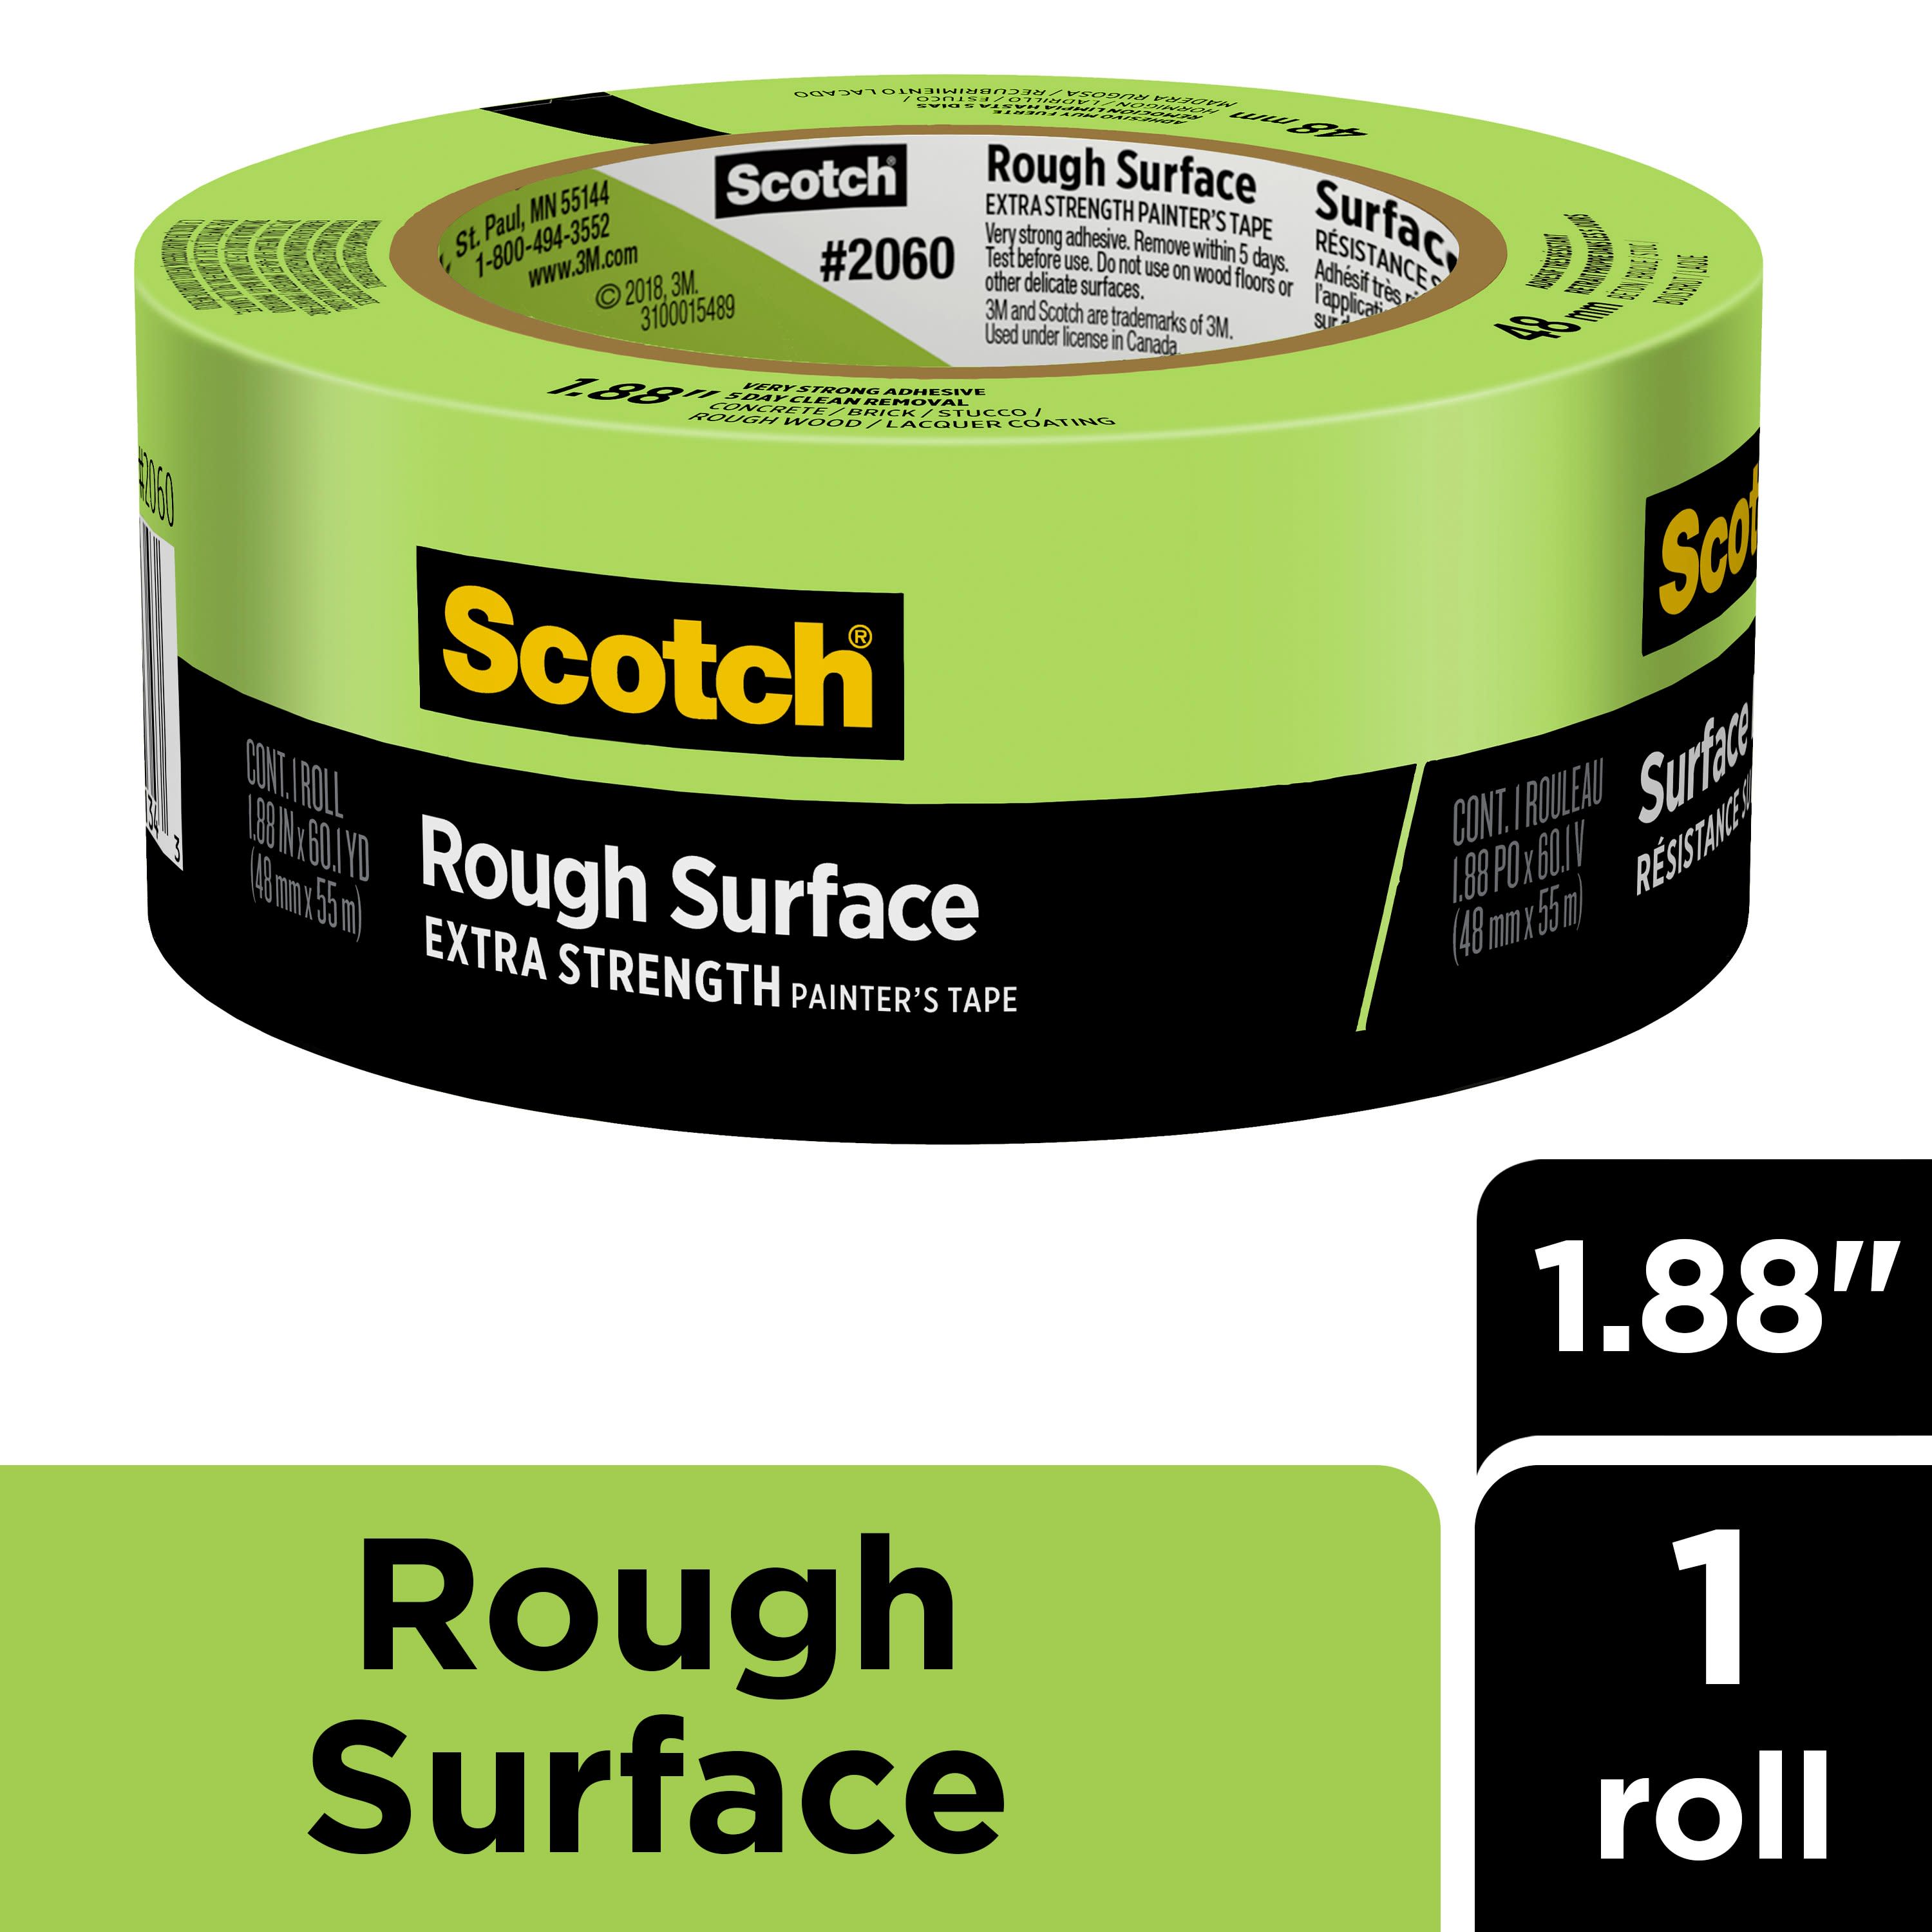 Scotch Rough Surface Painters Tape, Green, 1.88 inches x 60.1 yards, 1 Roll - image 1 of 22